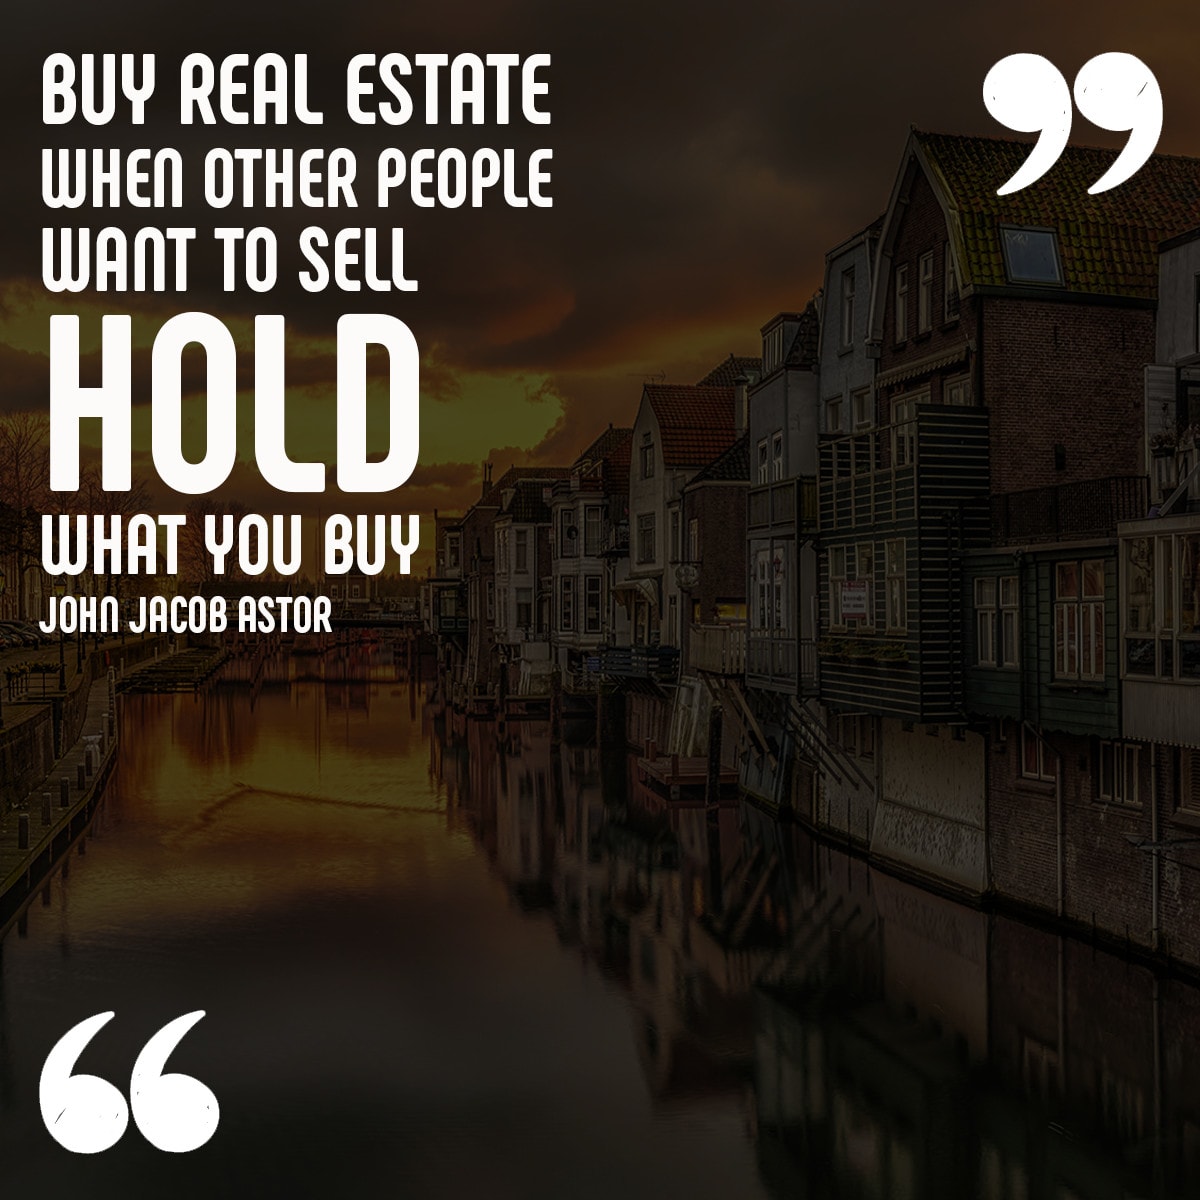 Real Estate Quotes Template - PosterMyWall